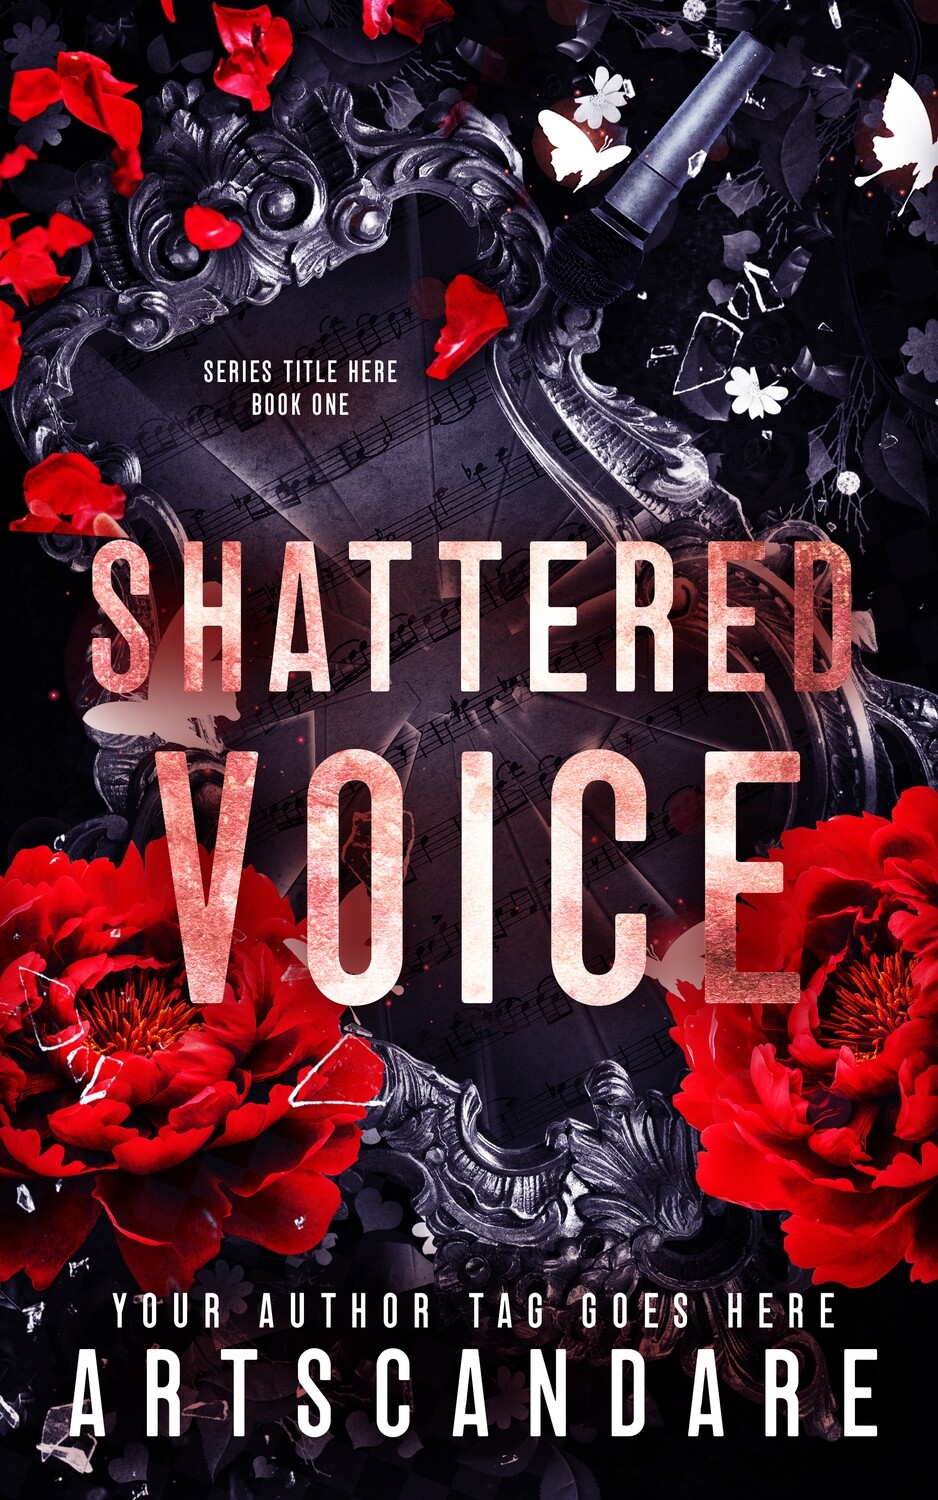 SHATTERED VOICE